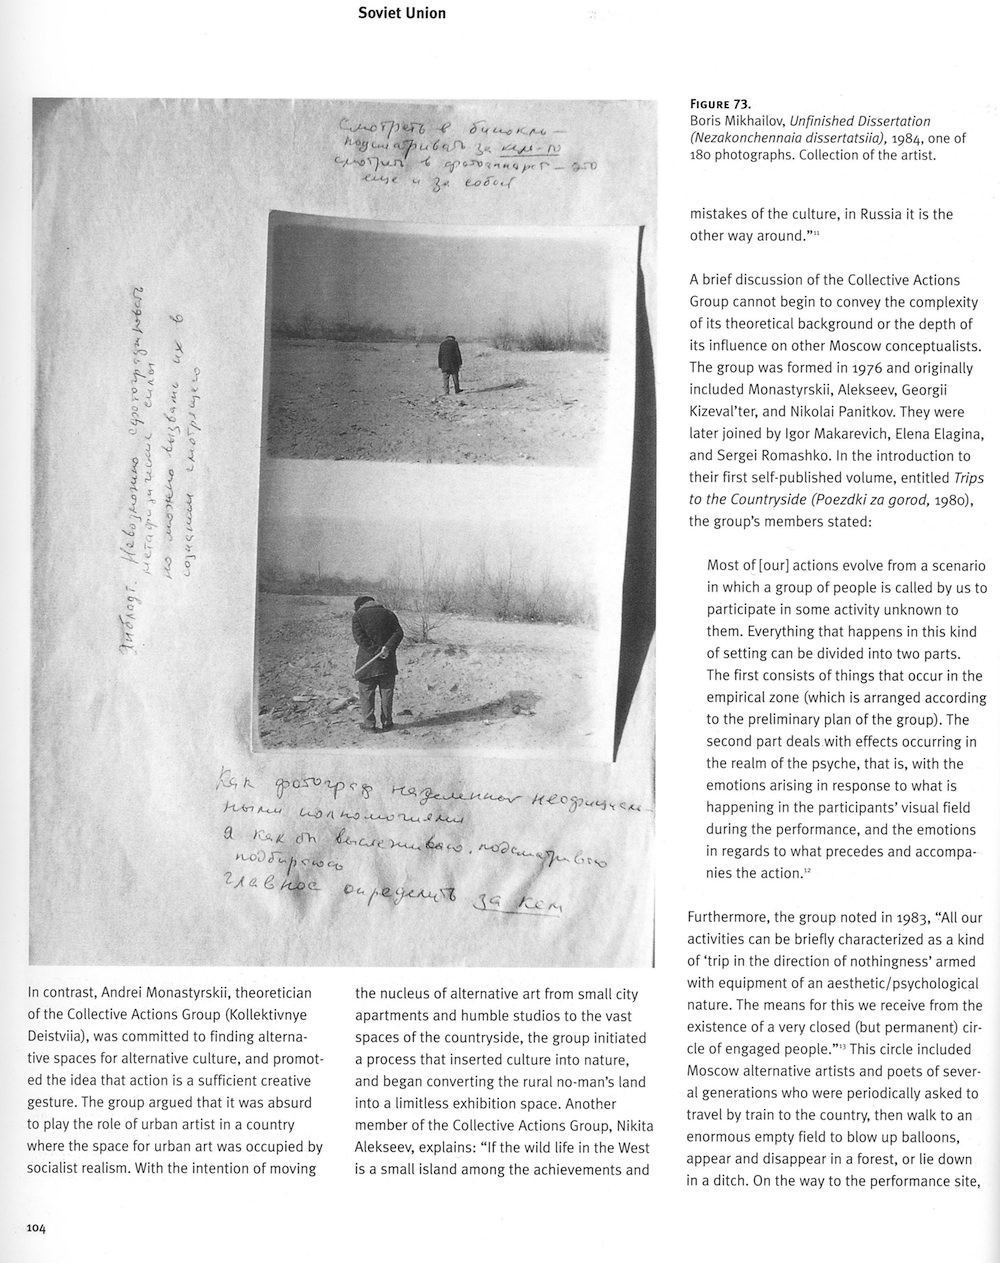 Margarita Tupitsyn. About Early Soviet Conceptualism. Page 6